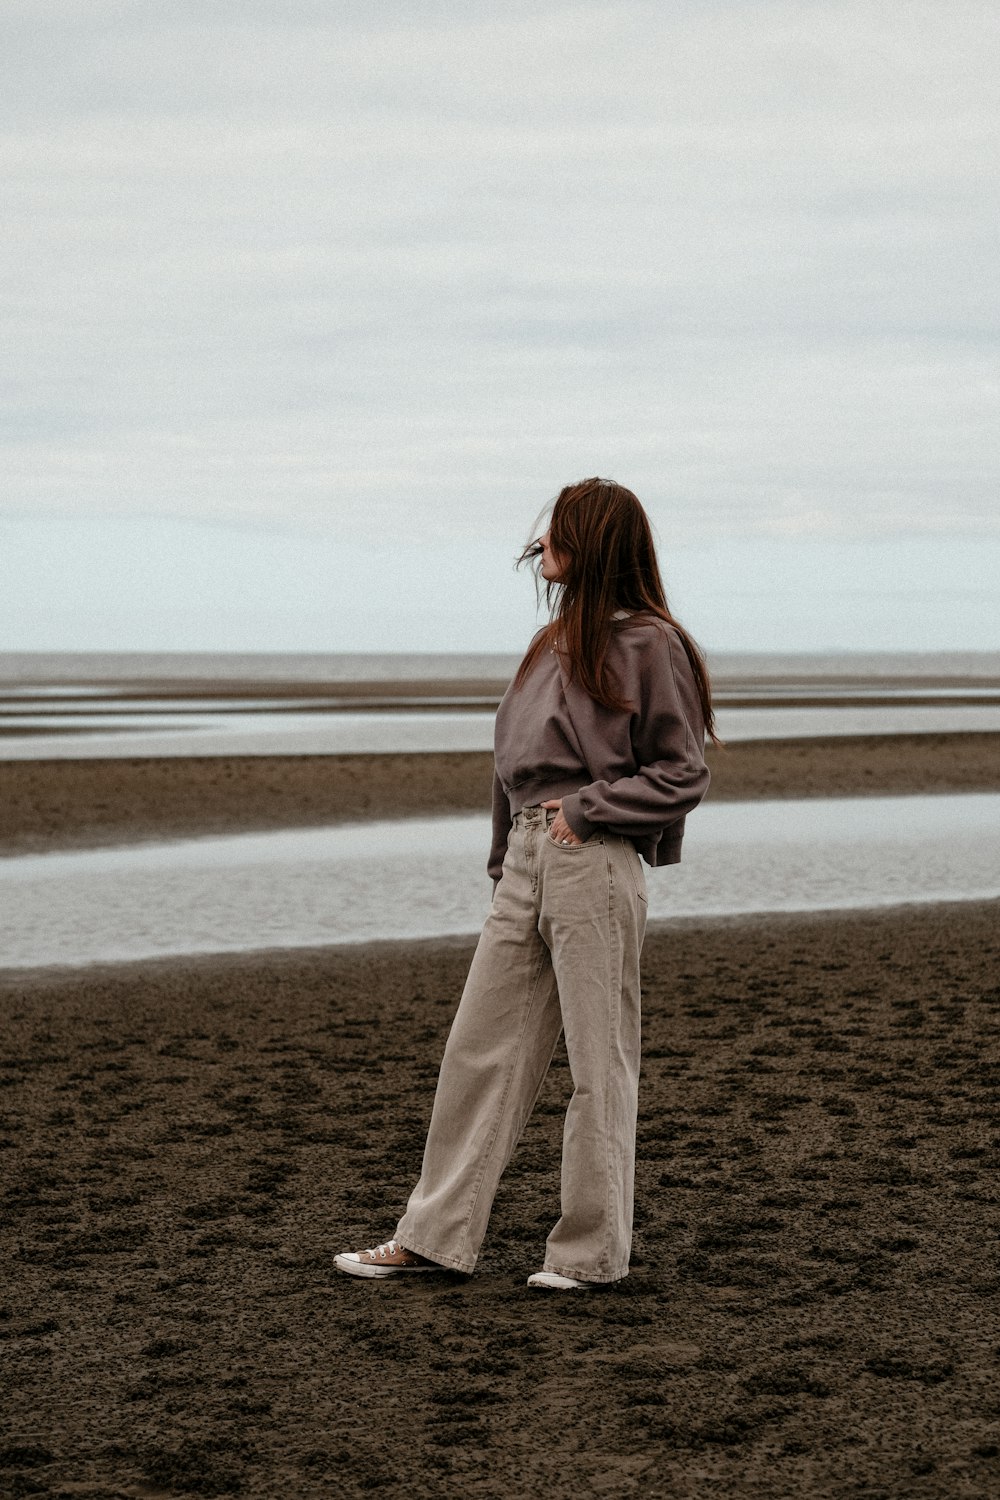 a woman standing on a beach next to a body of water